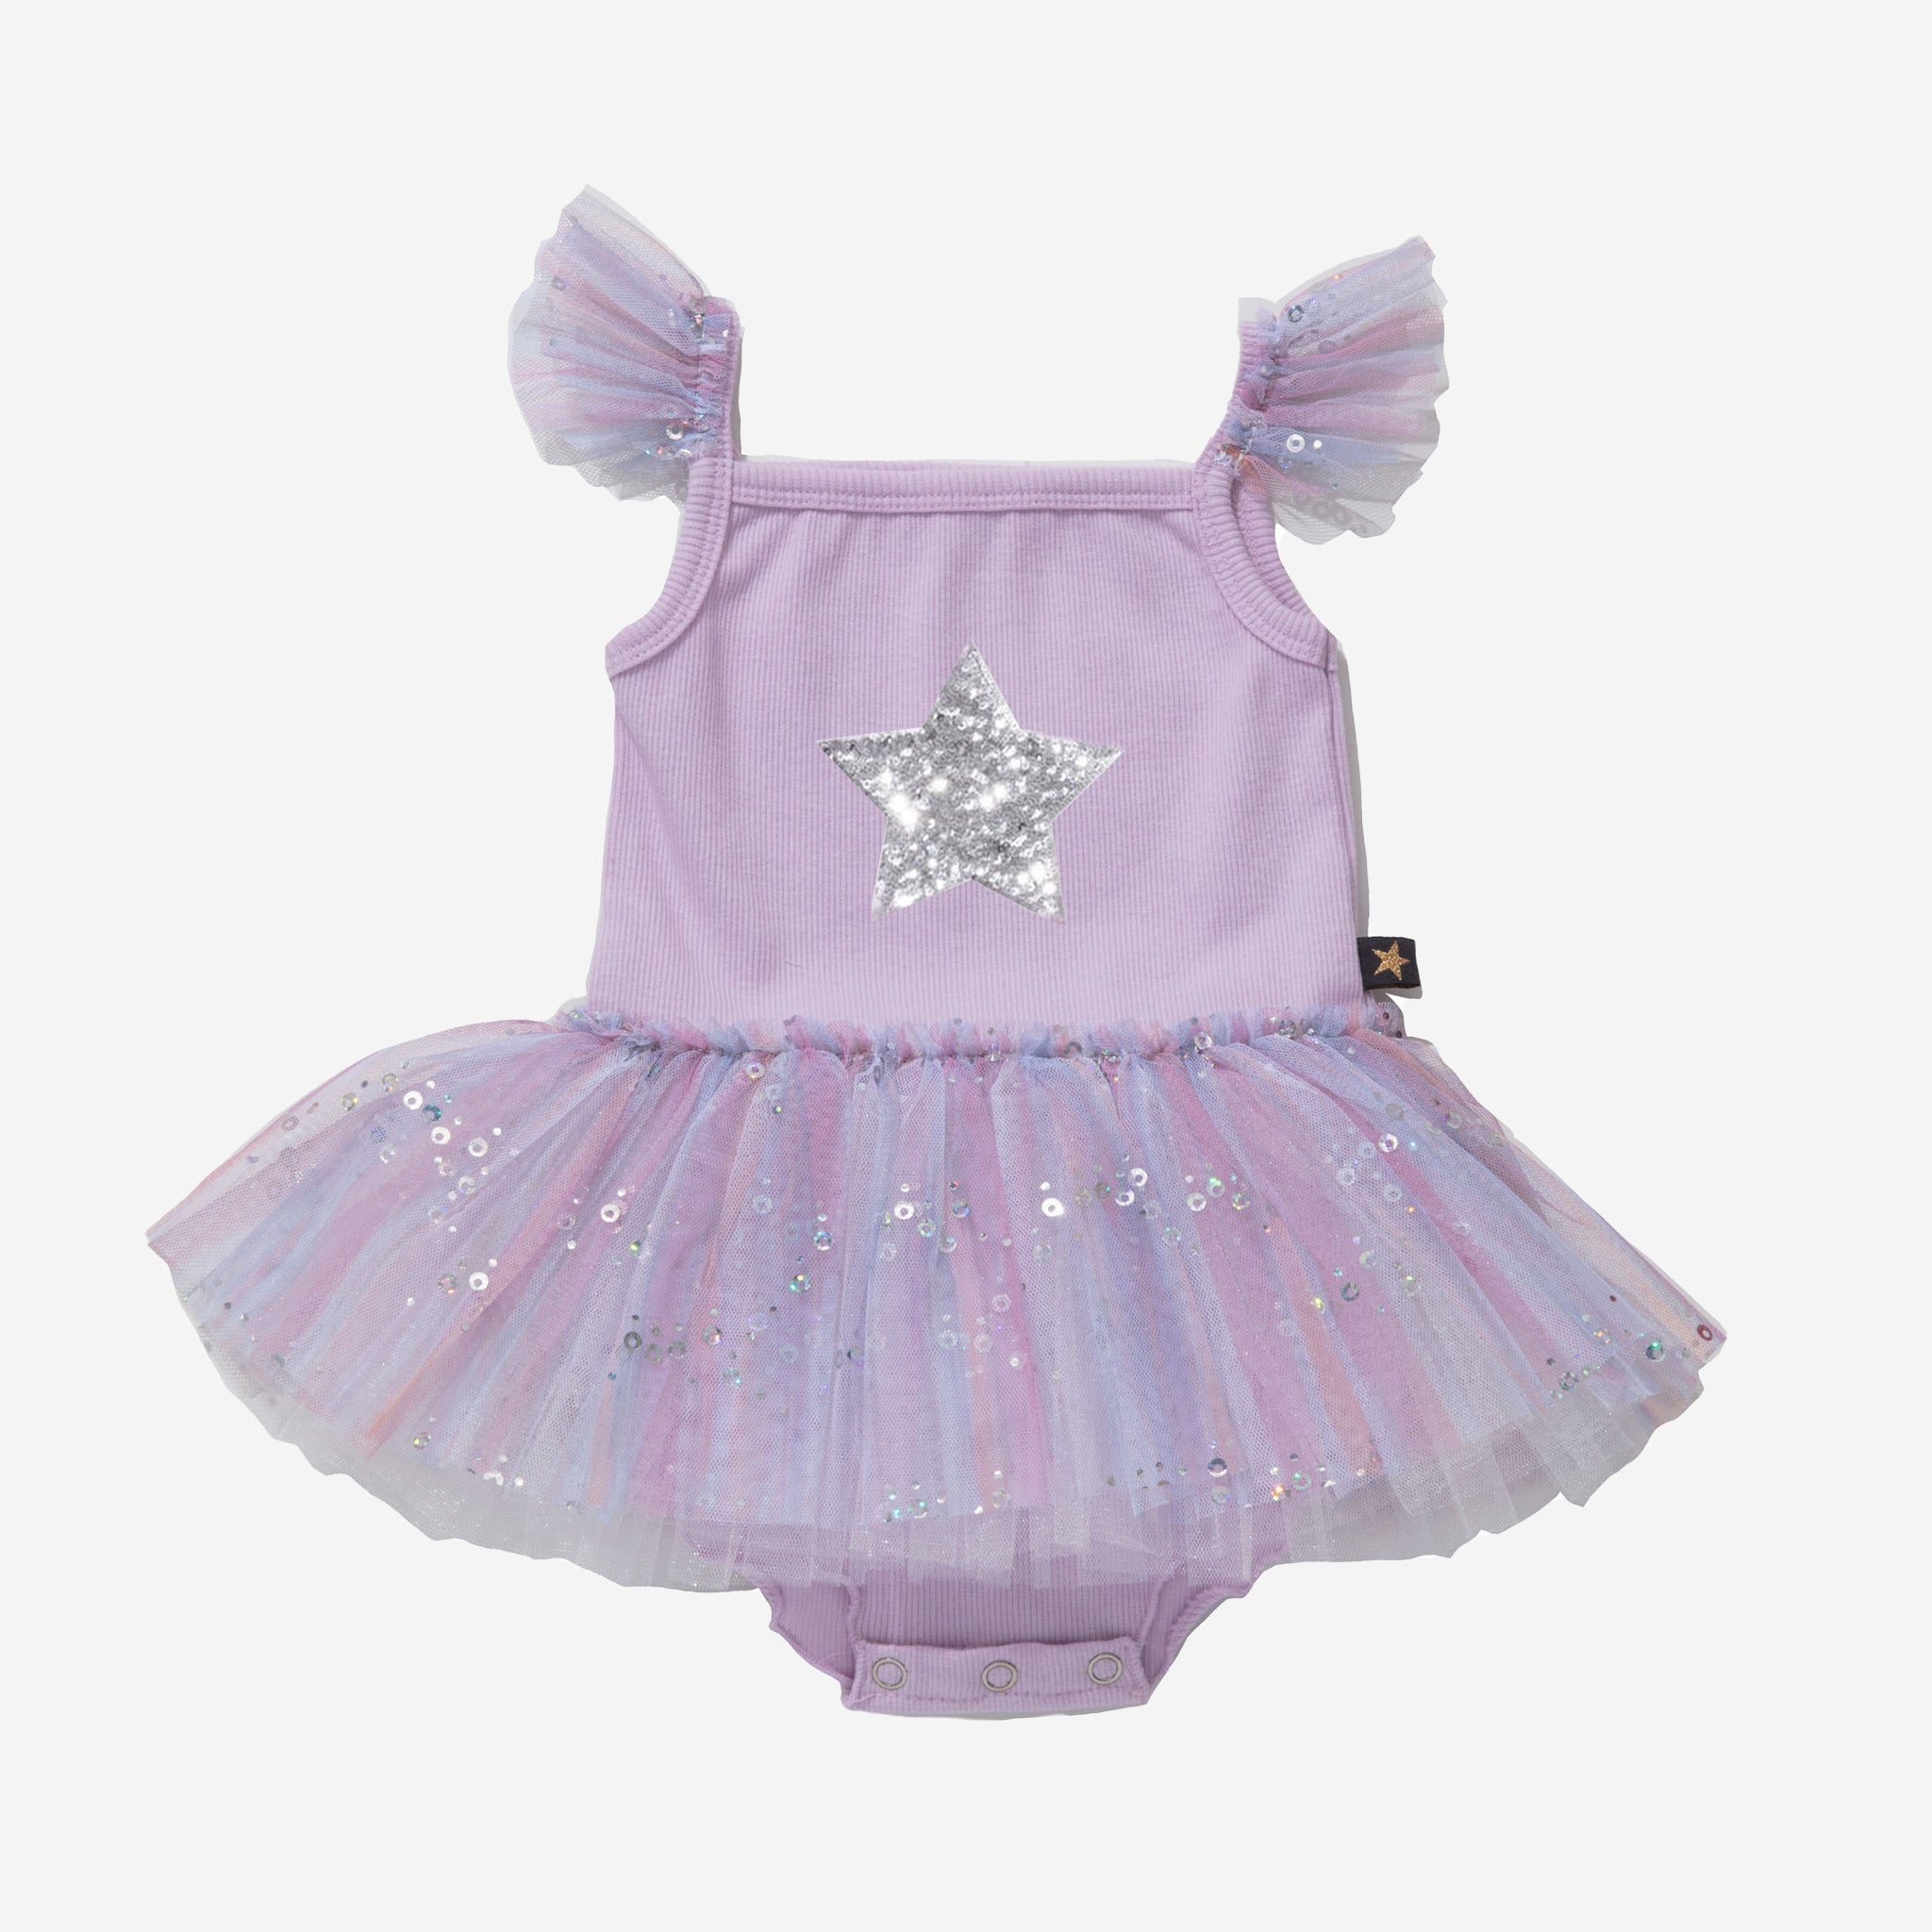 pink baby spangle tutu onesie with silver glitter star 